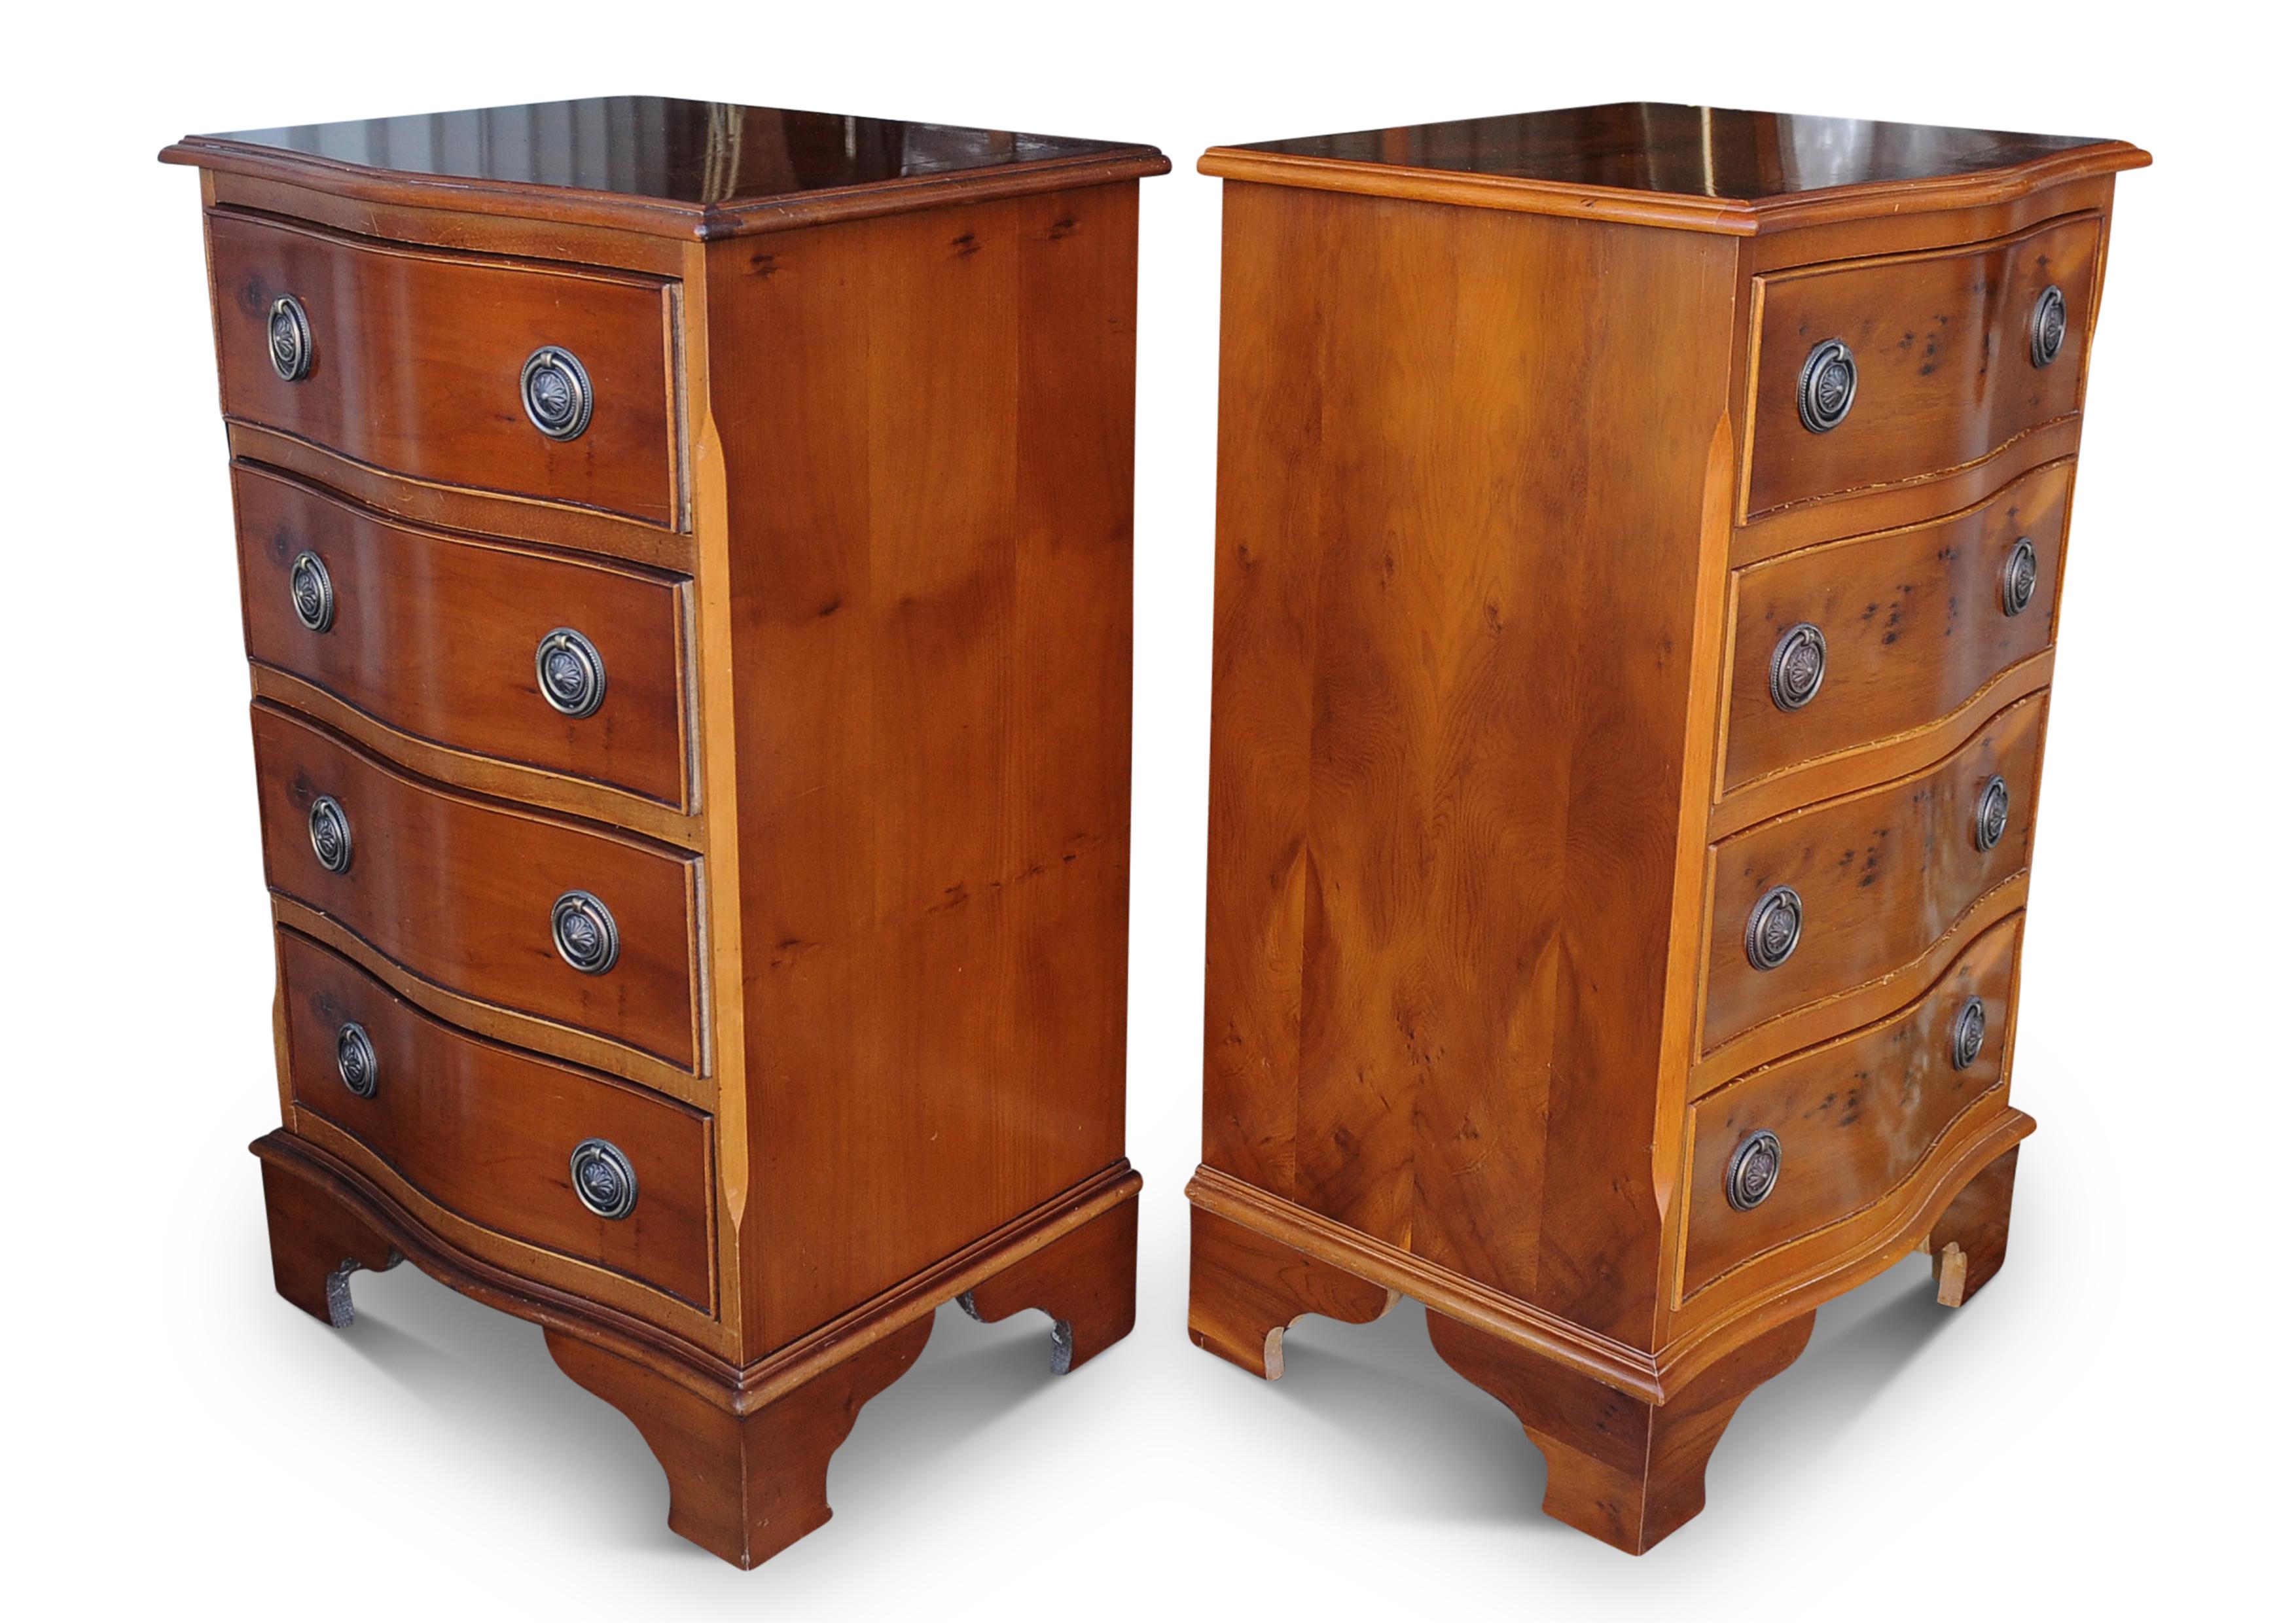 British Pair of Yew Wood Serpentine Front Four Drawer Bedside Cabinets For Sale